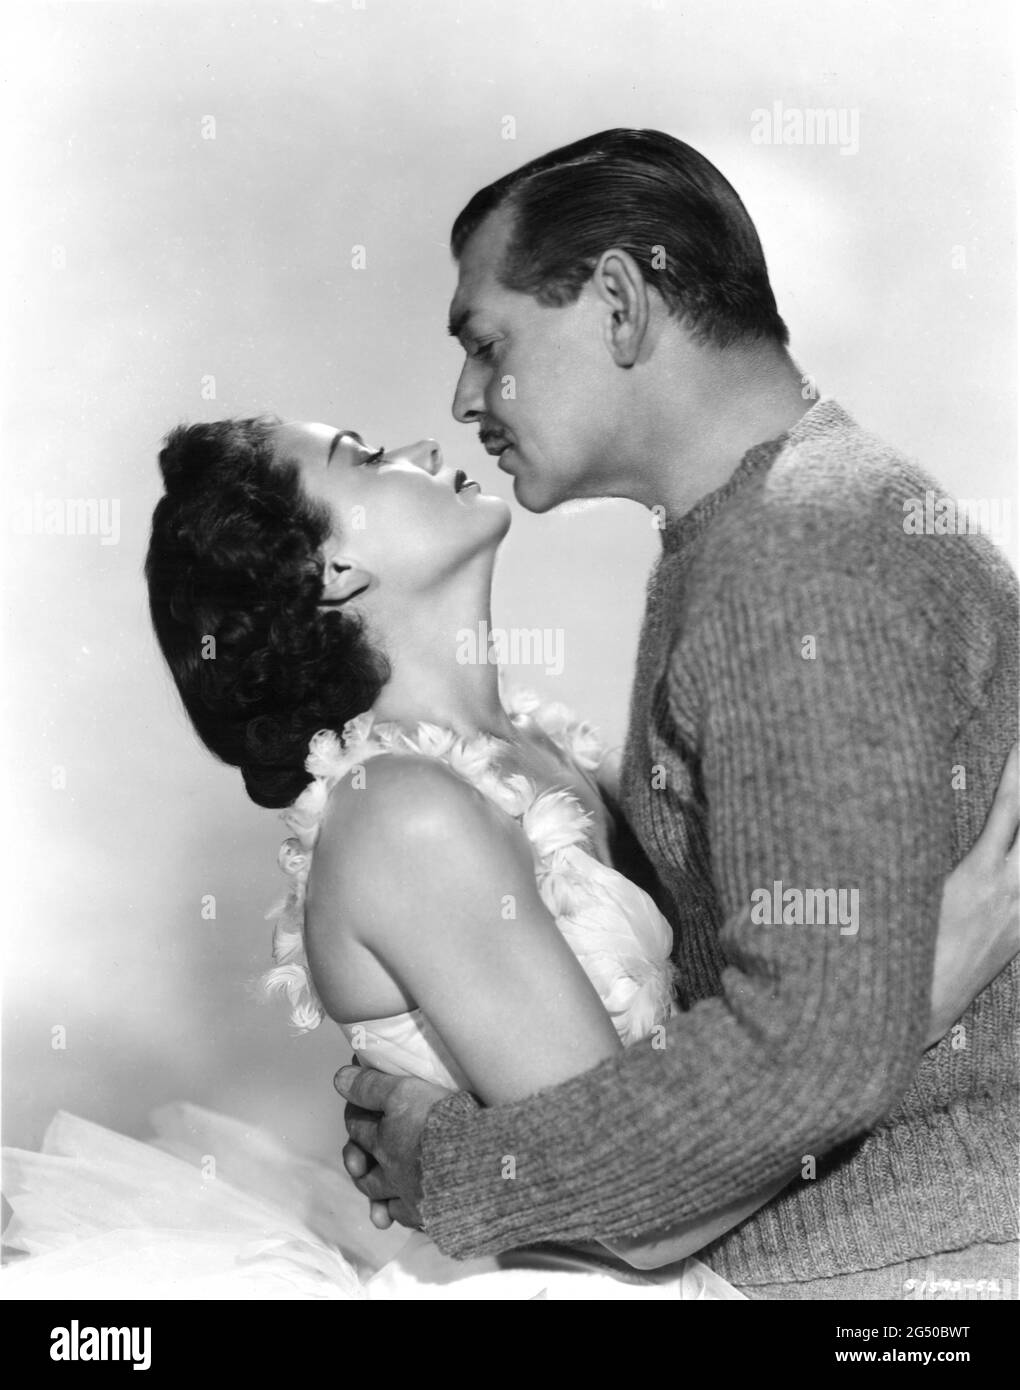 GENE TIERNEY and CLARK GABLE Publicity Portrait in NEVER LET ME GO 1953 director DELMER DAVES from novel Come The Dawn by Paul Winterton producer Clarence Brown Metro Goldwyn Mayer Stock Photo